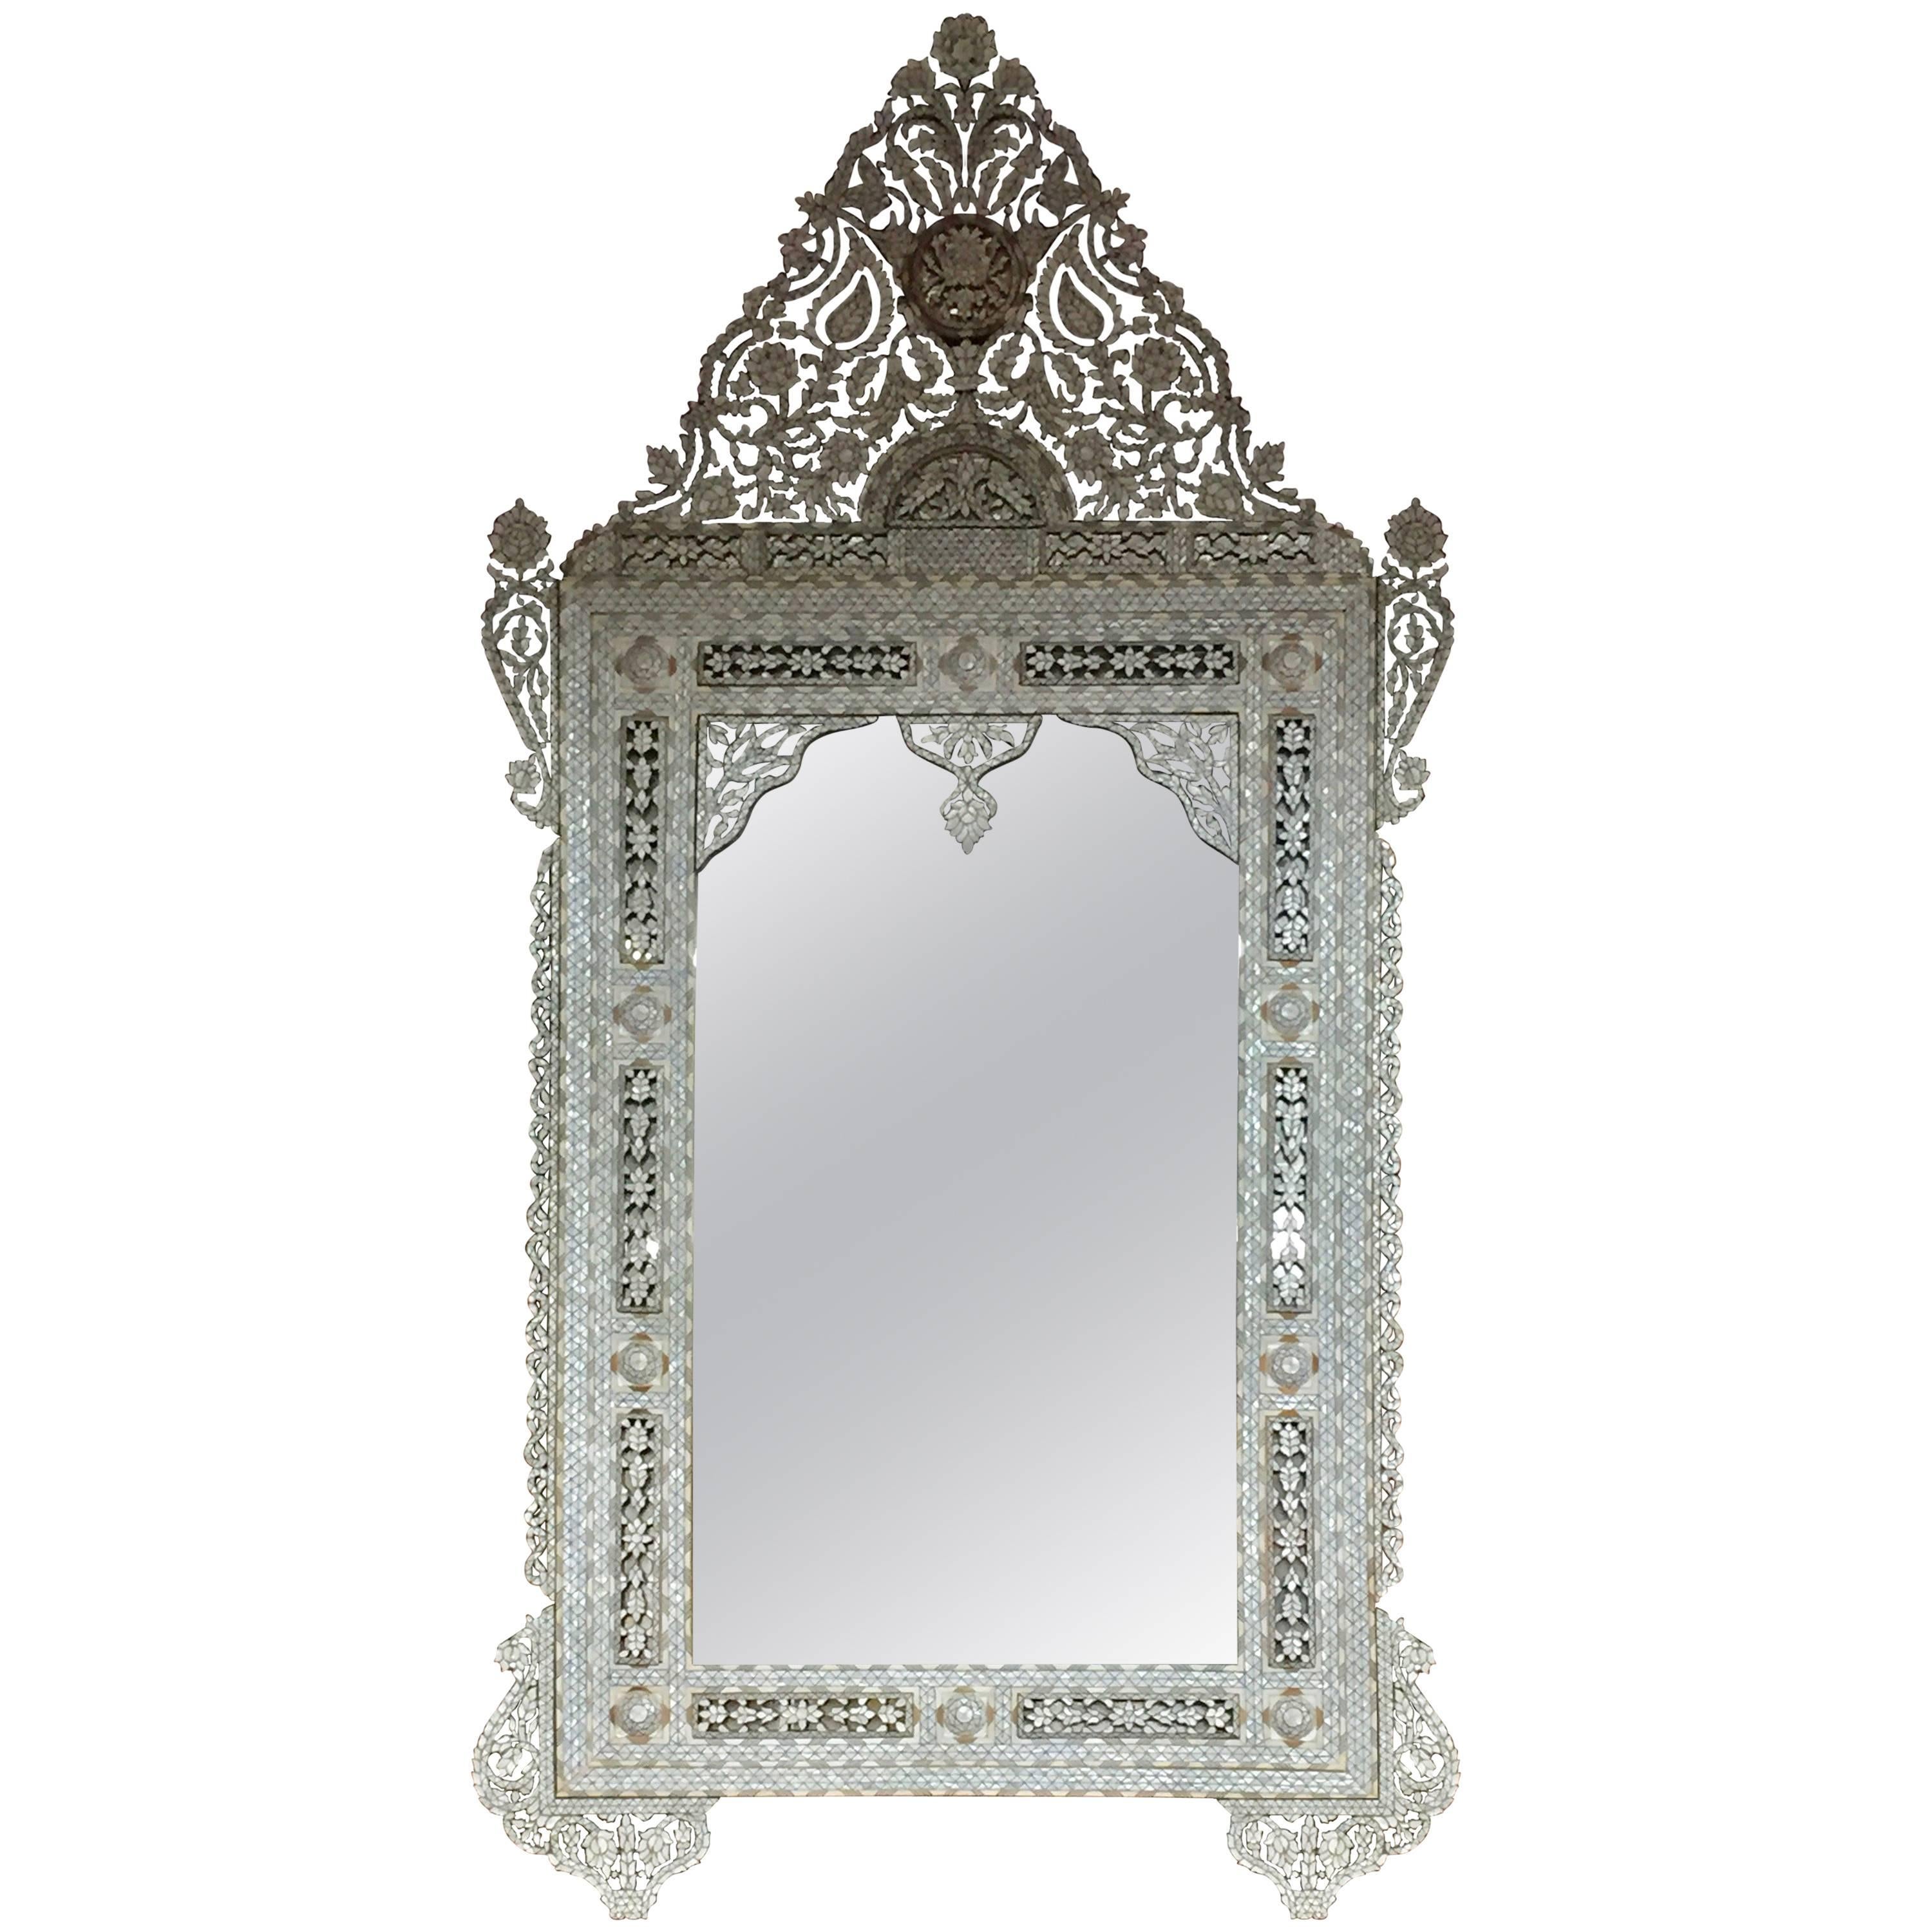 Massive Syrian Inlay Mother-of-Pearl Mirror Haskell For Sale